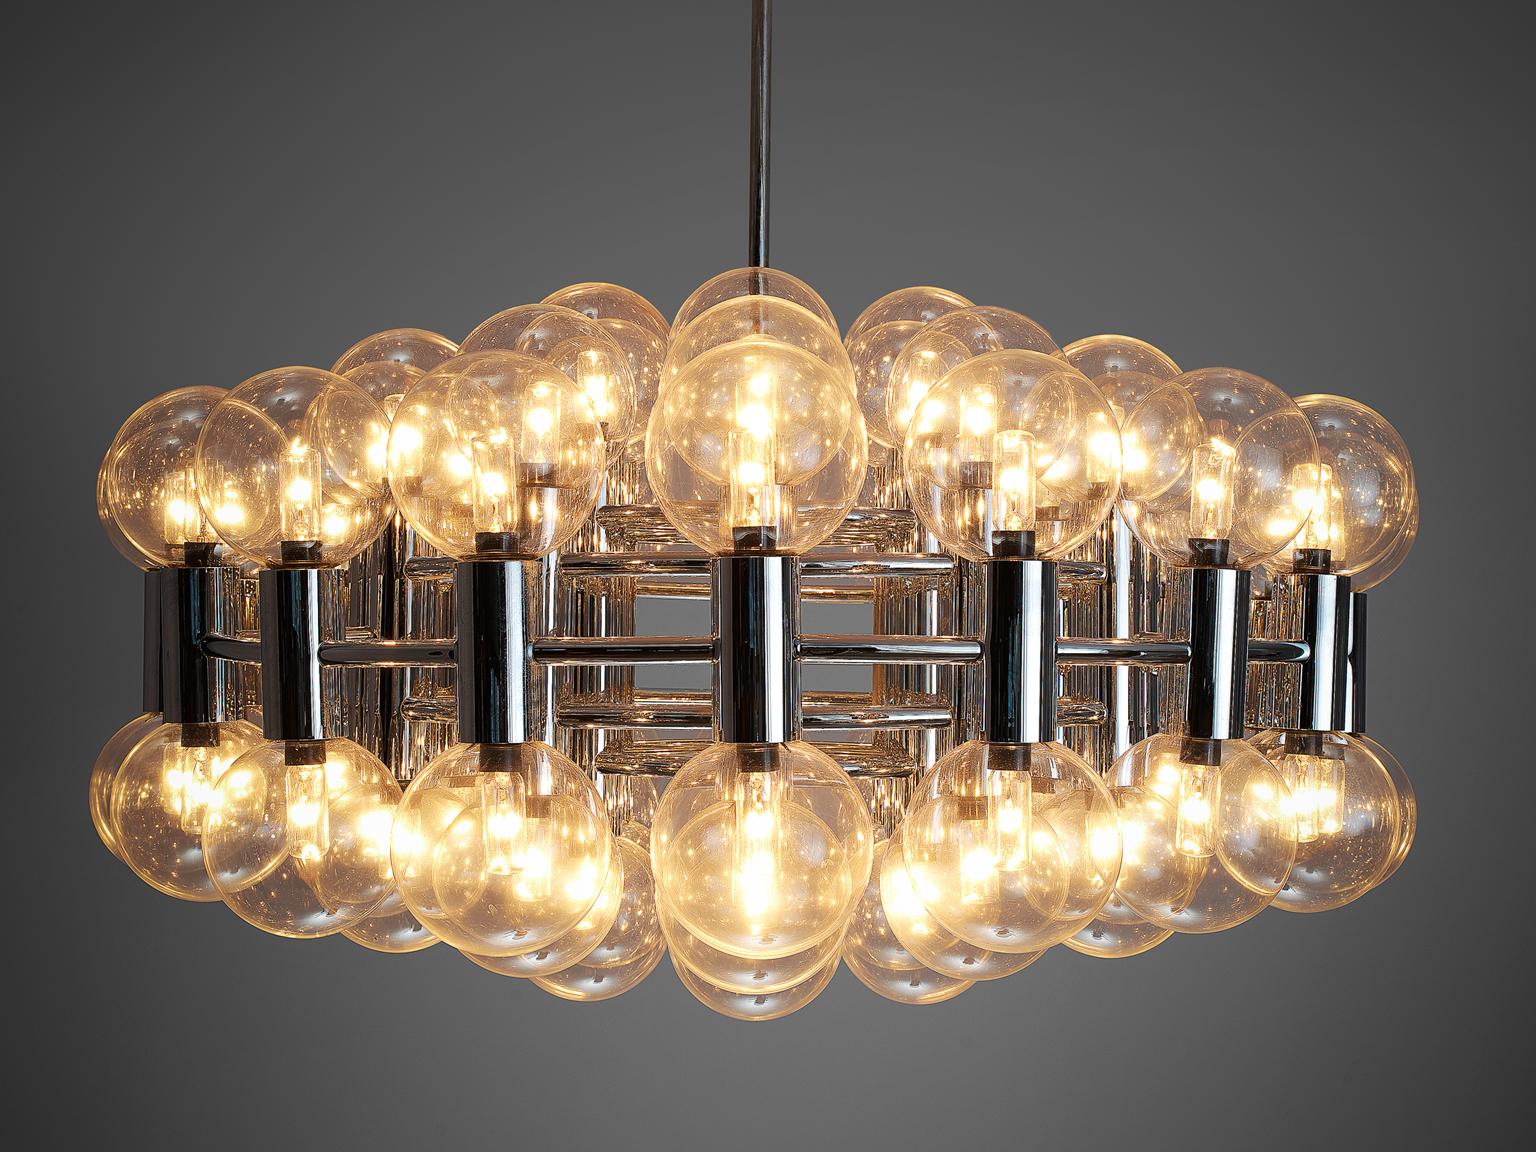 Late 20th Century Large Motoko Ishii for Staff Chandelier with 72 Bulbs